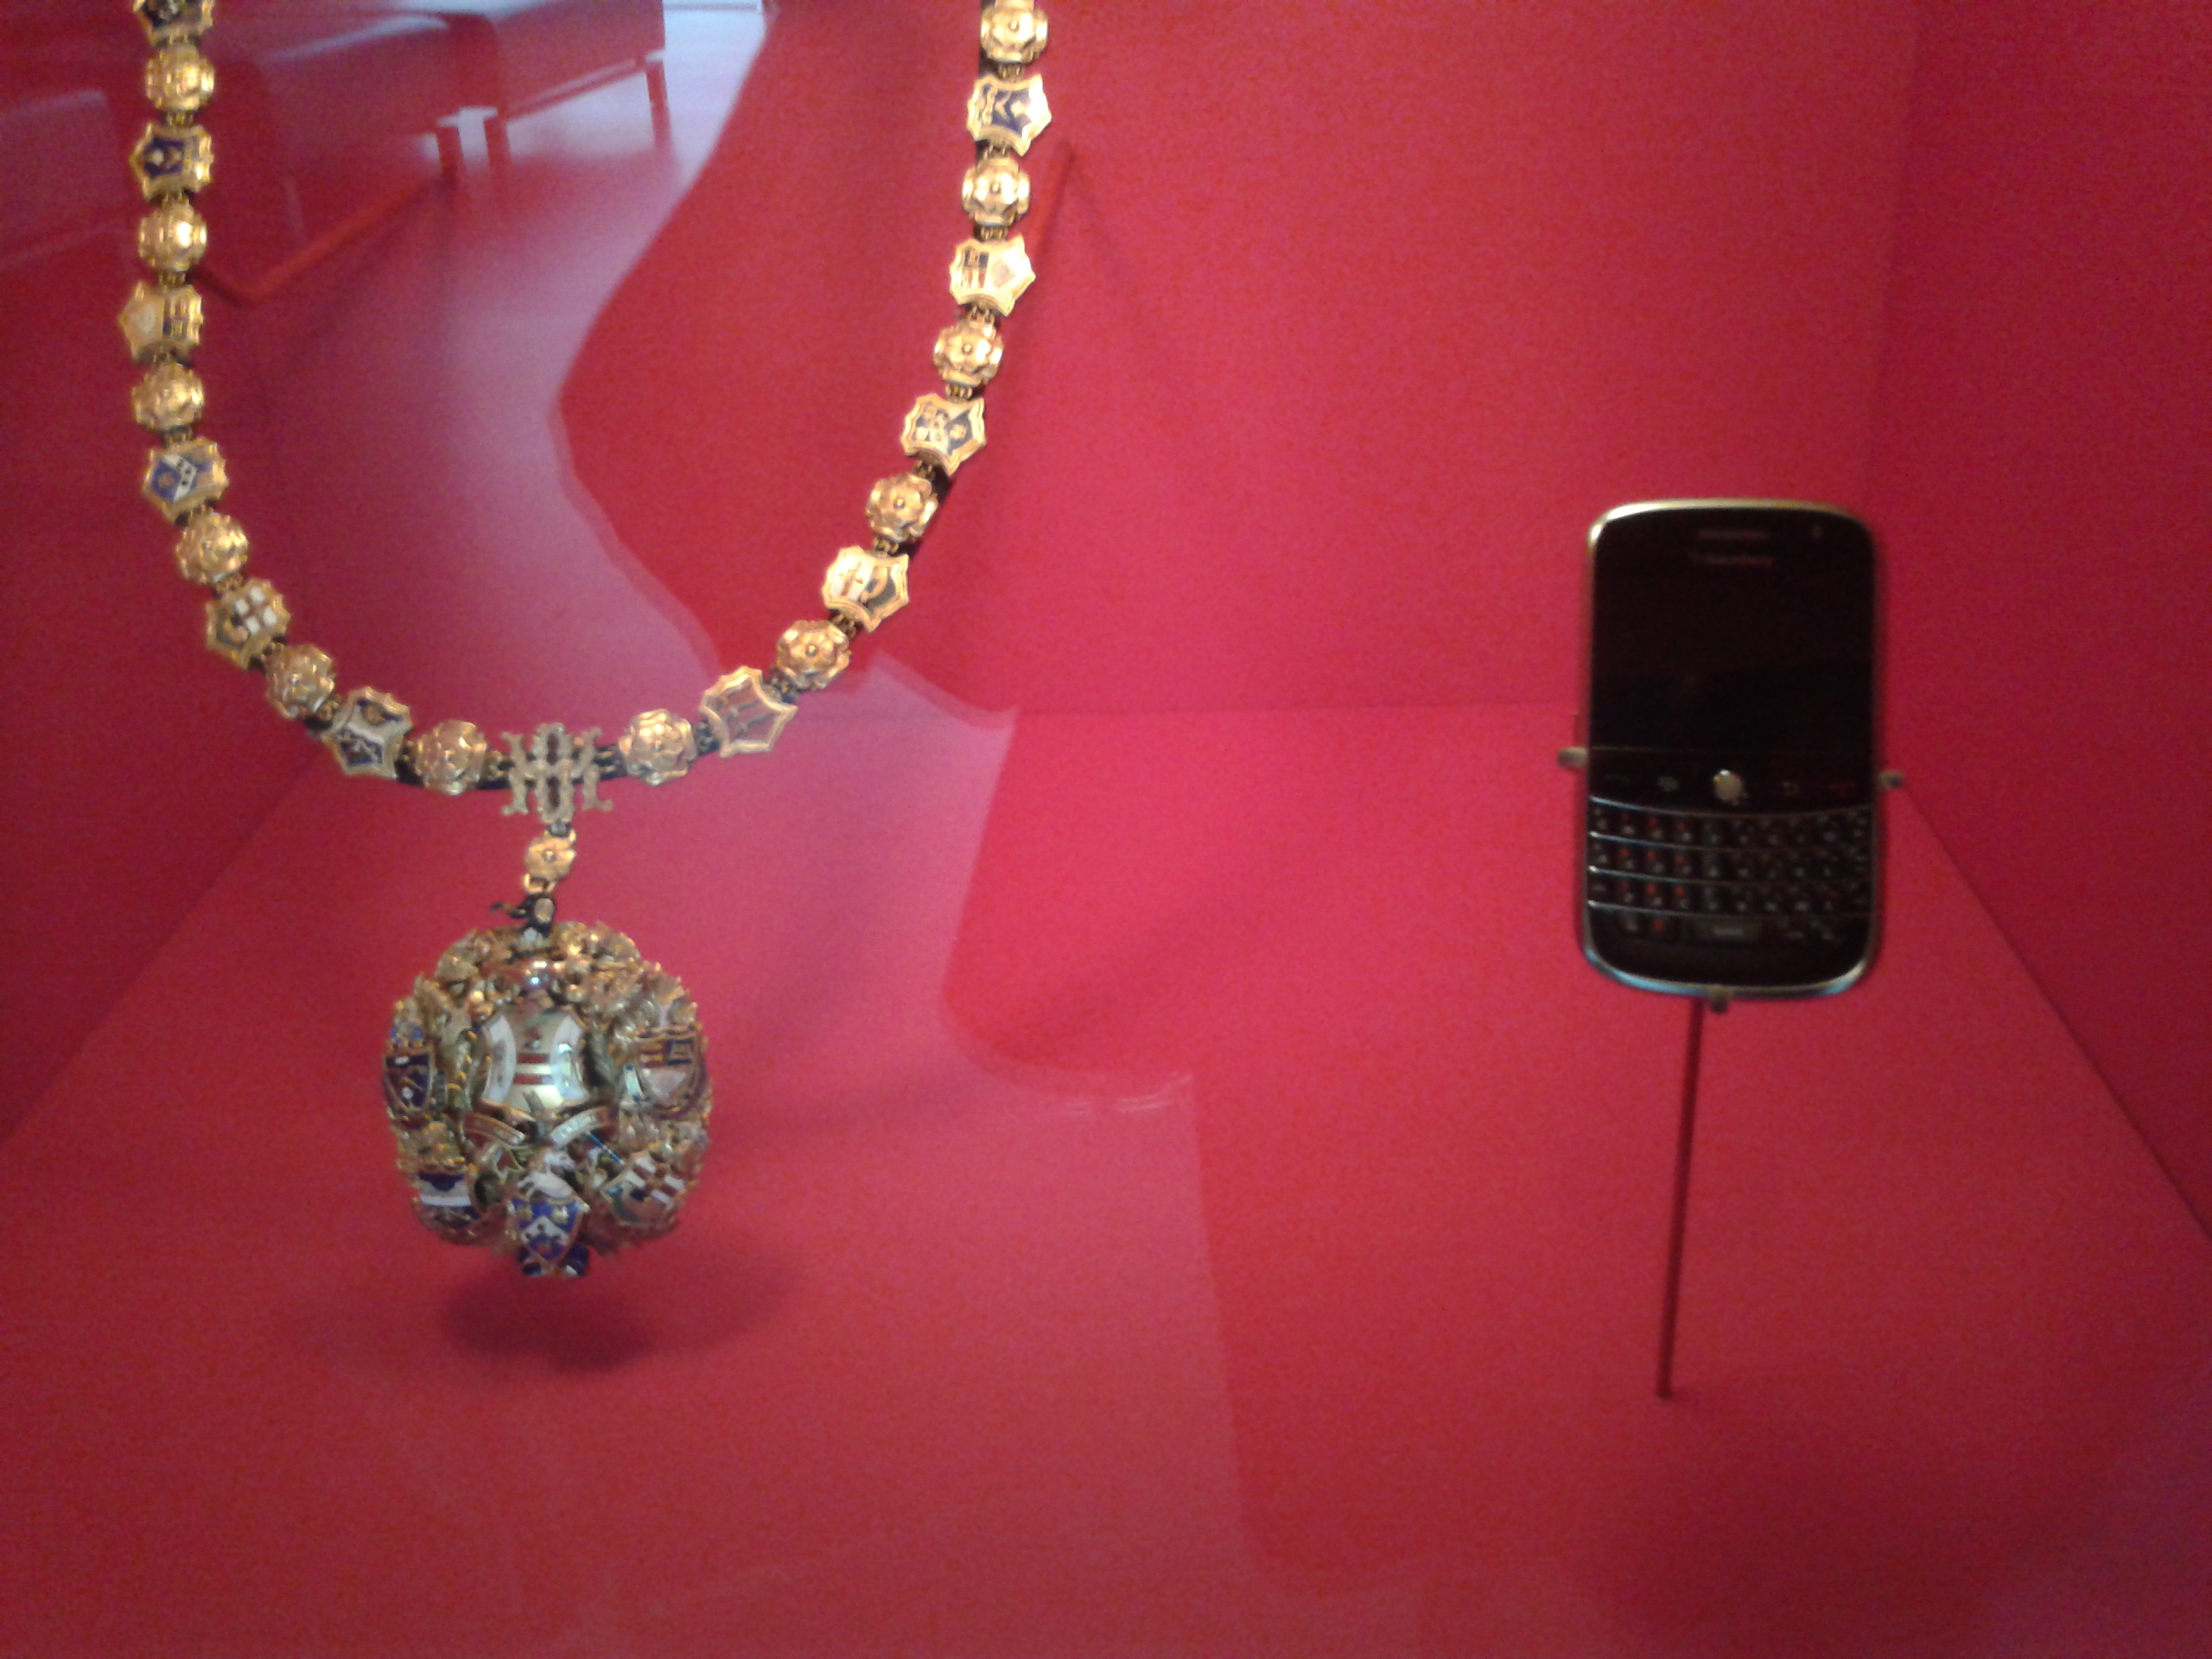 Blackberry displayed as a museum artefact - how do we Future Proof technology?